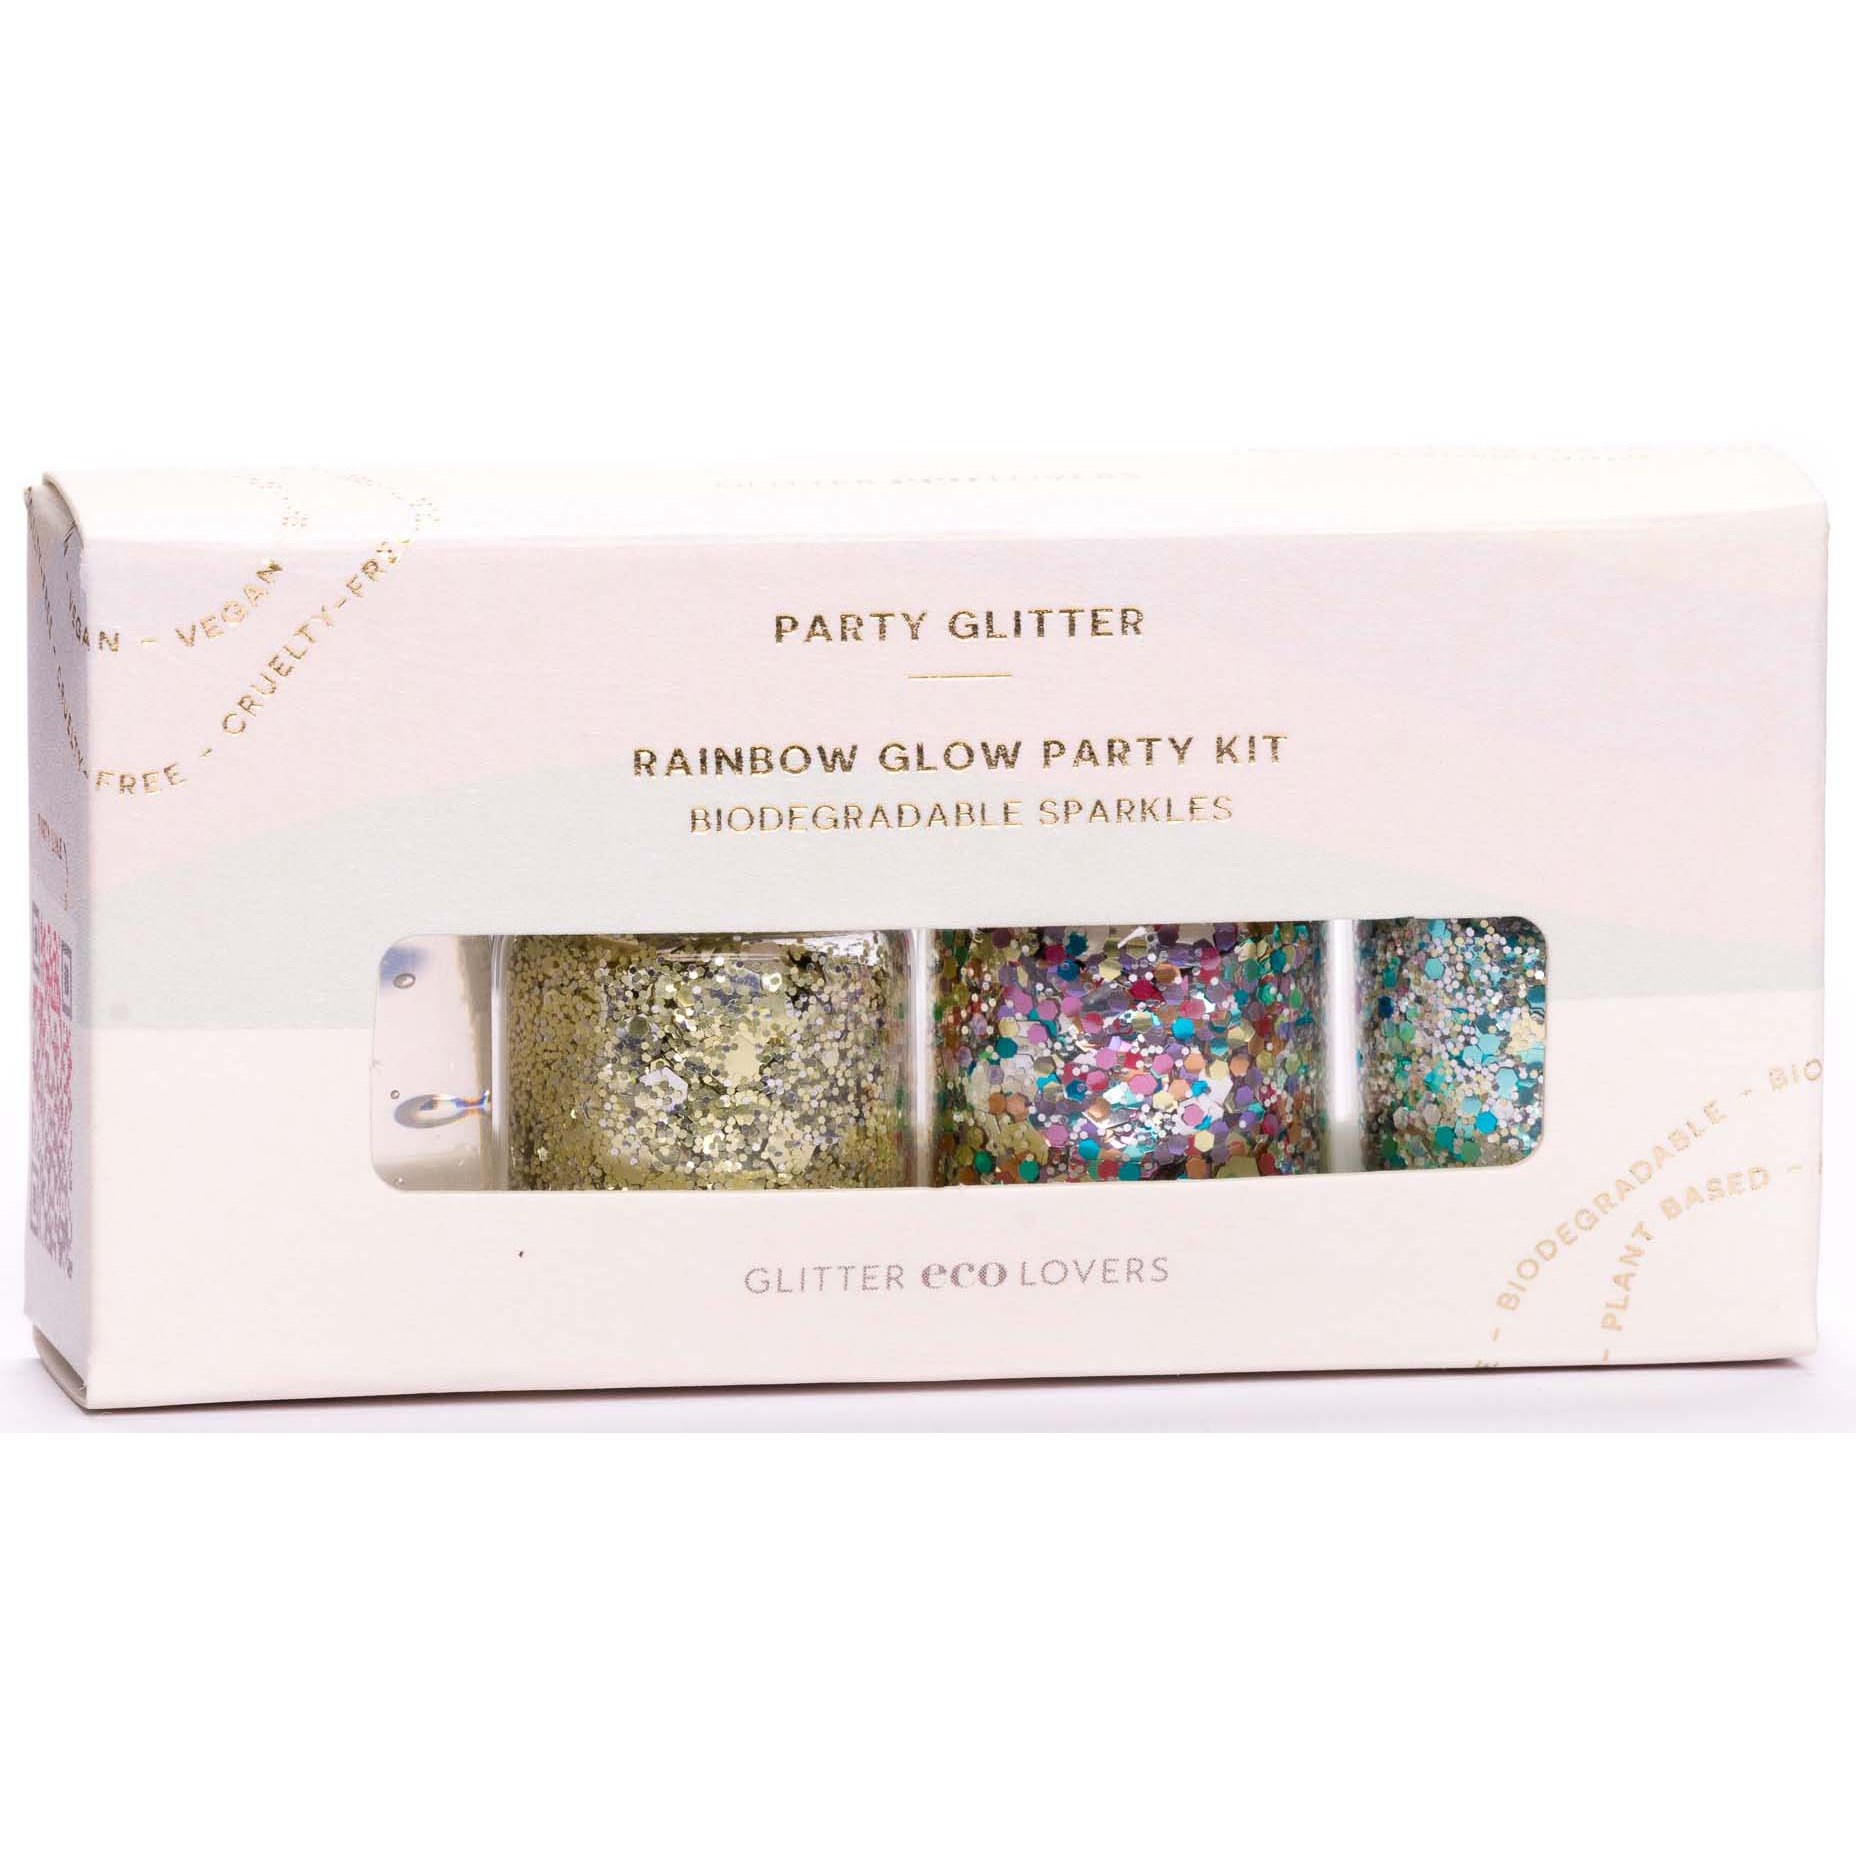 Glitter Eco Lovers Party Kit